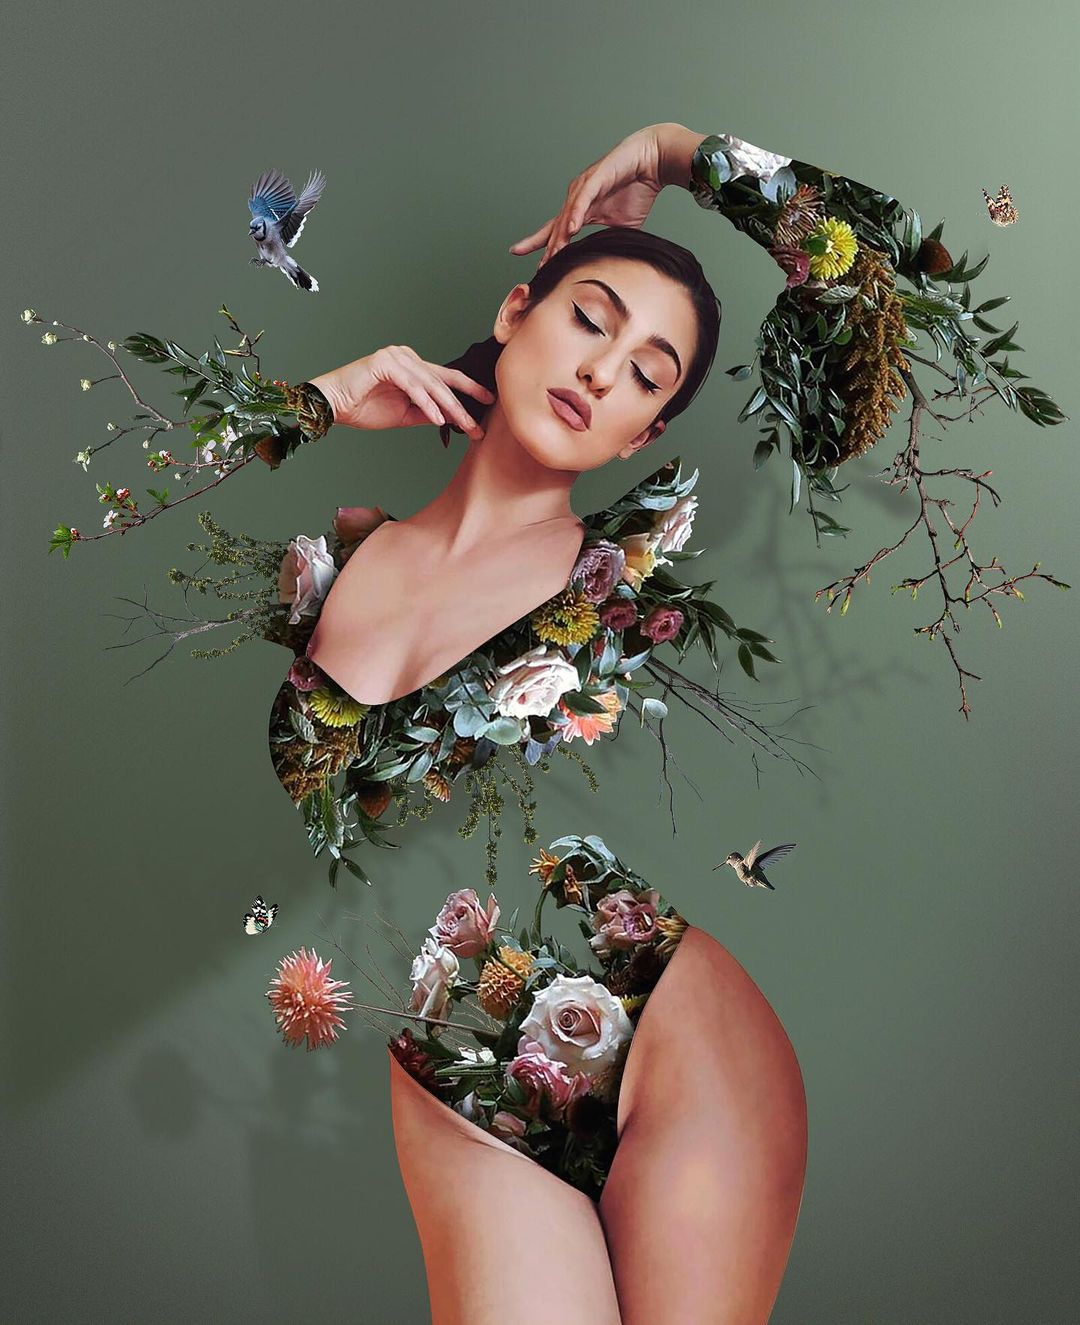 Nature Blooms From the Human Body in the Digital Collages of Charles Bentley006